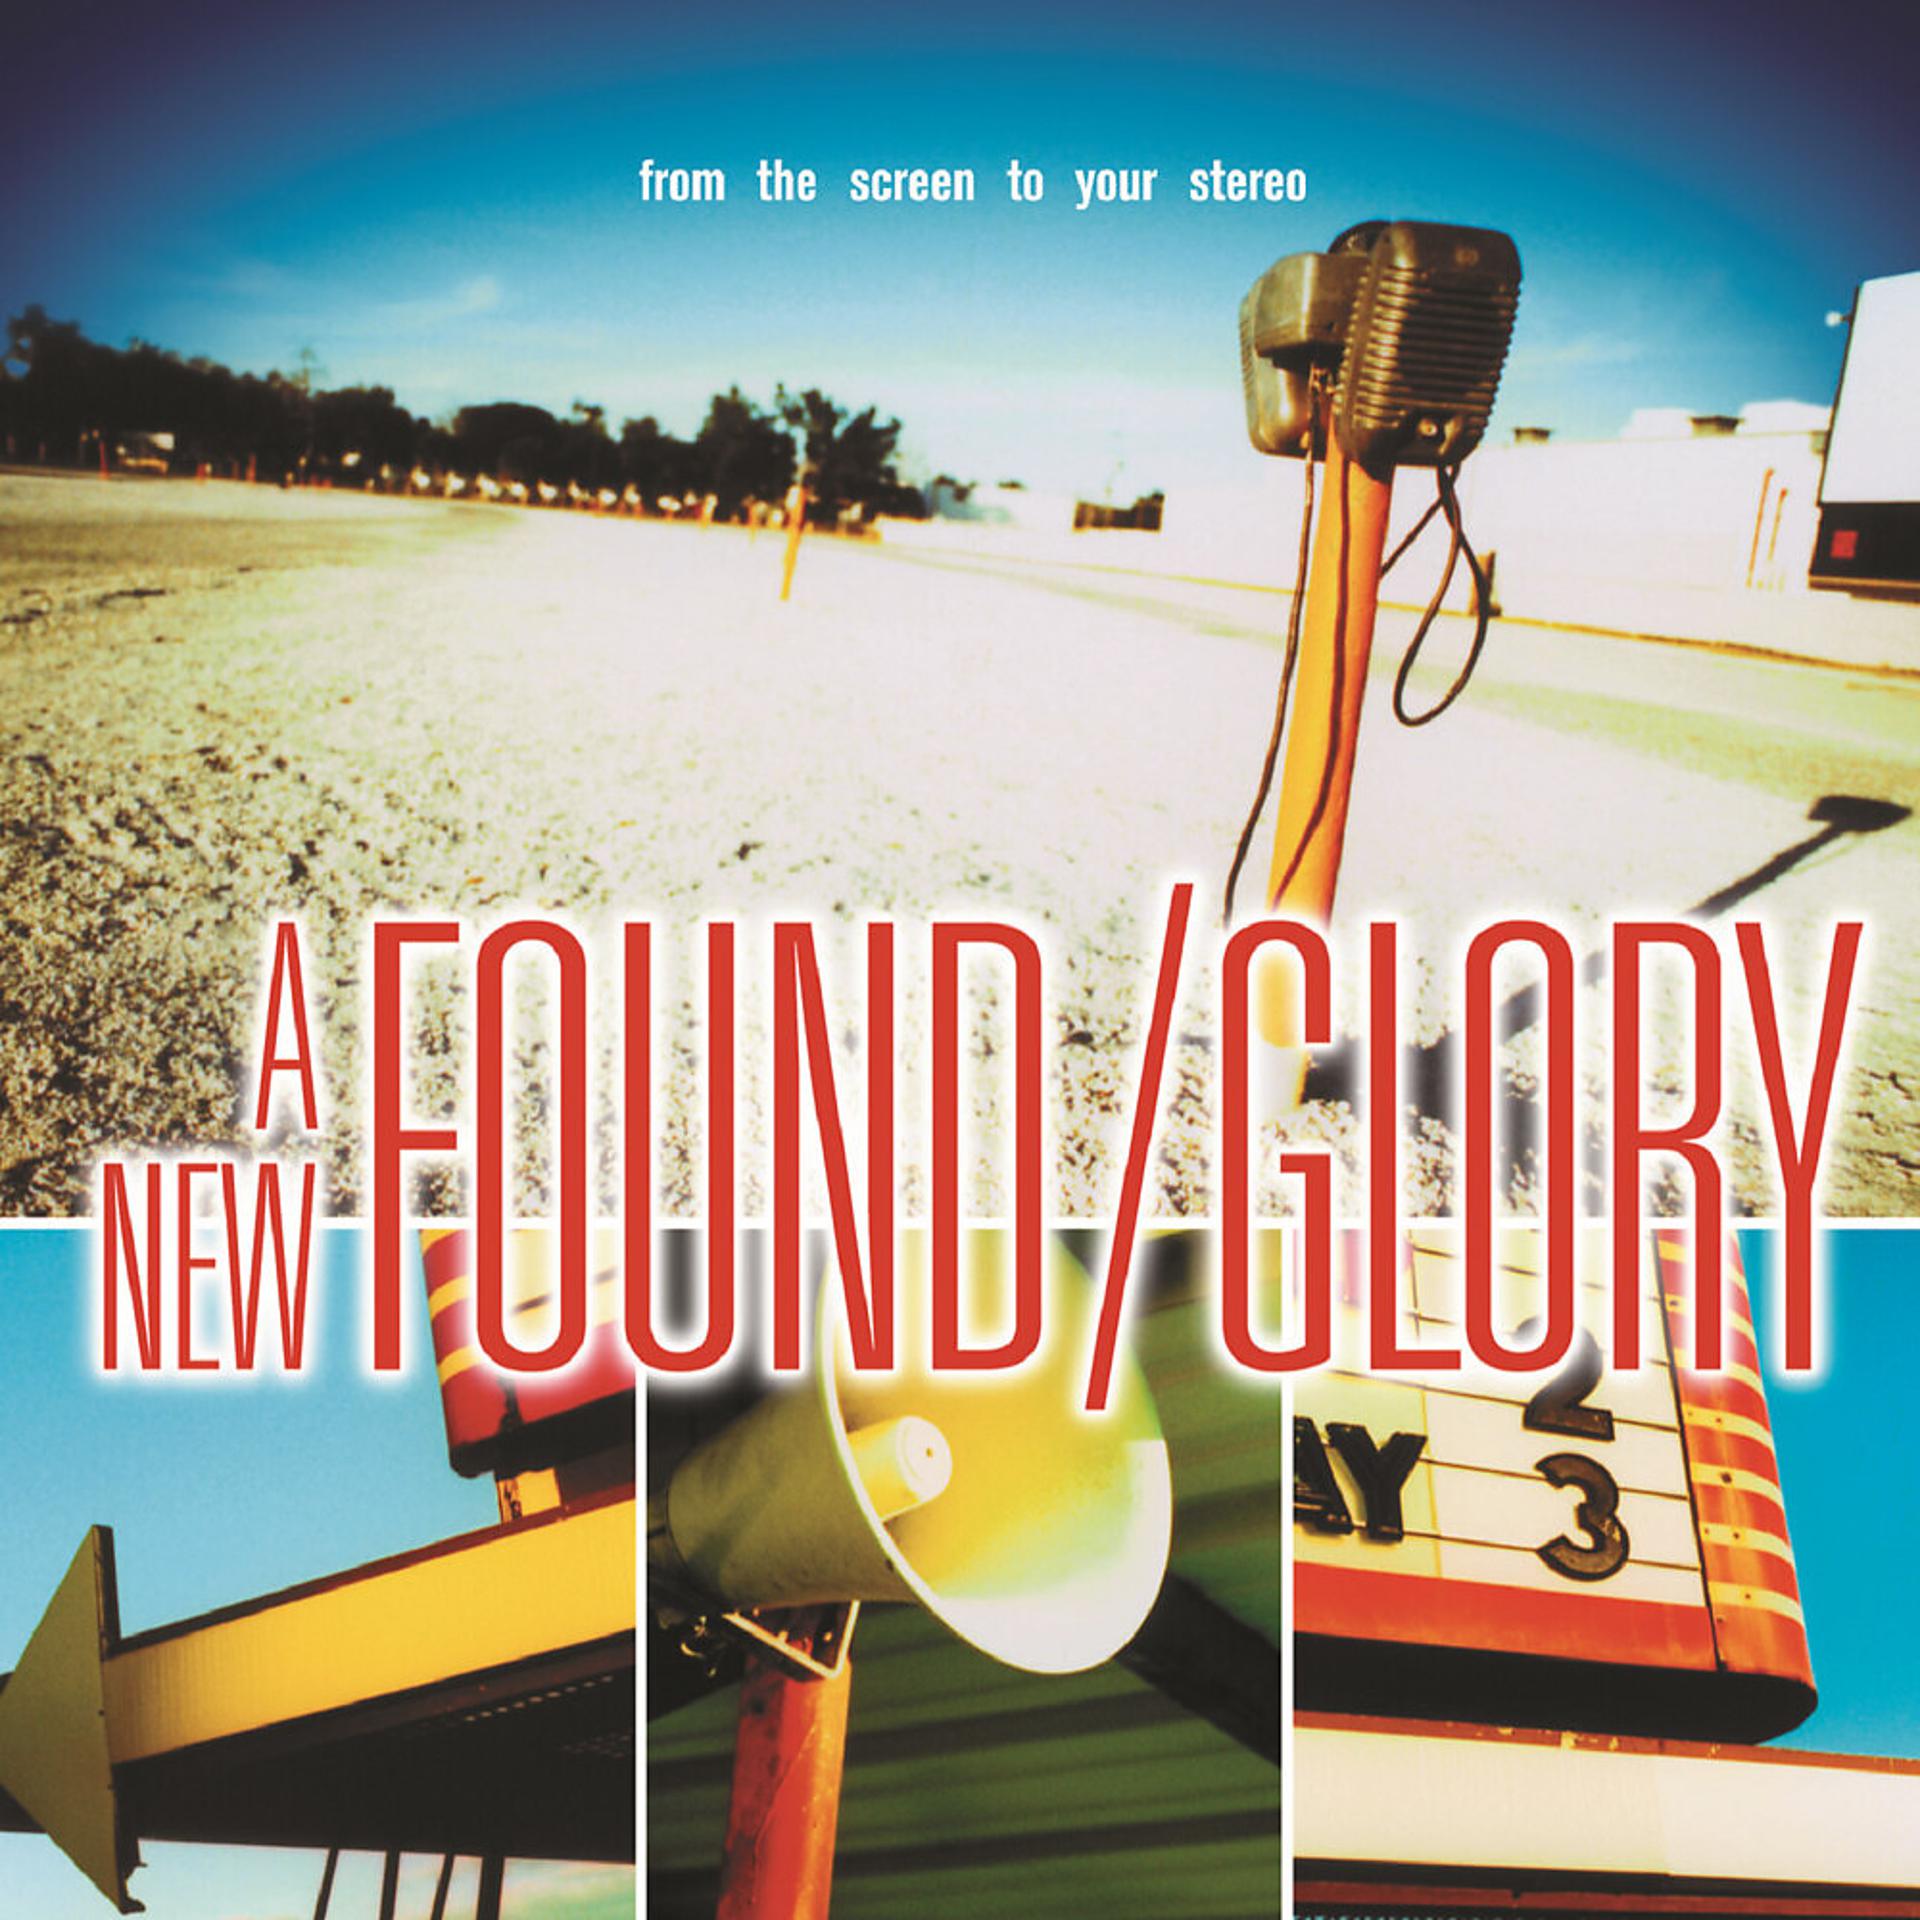 New found love. From the Screen to your stereo 3 New found Glory. New found Glory обложки альбомов. New found Glory винил. New found Glory слушать.